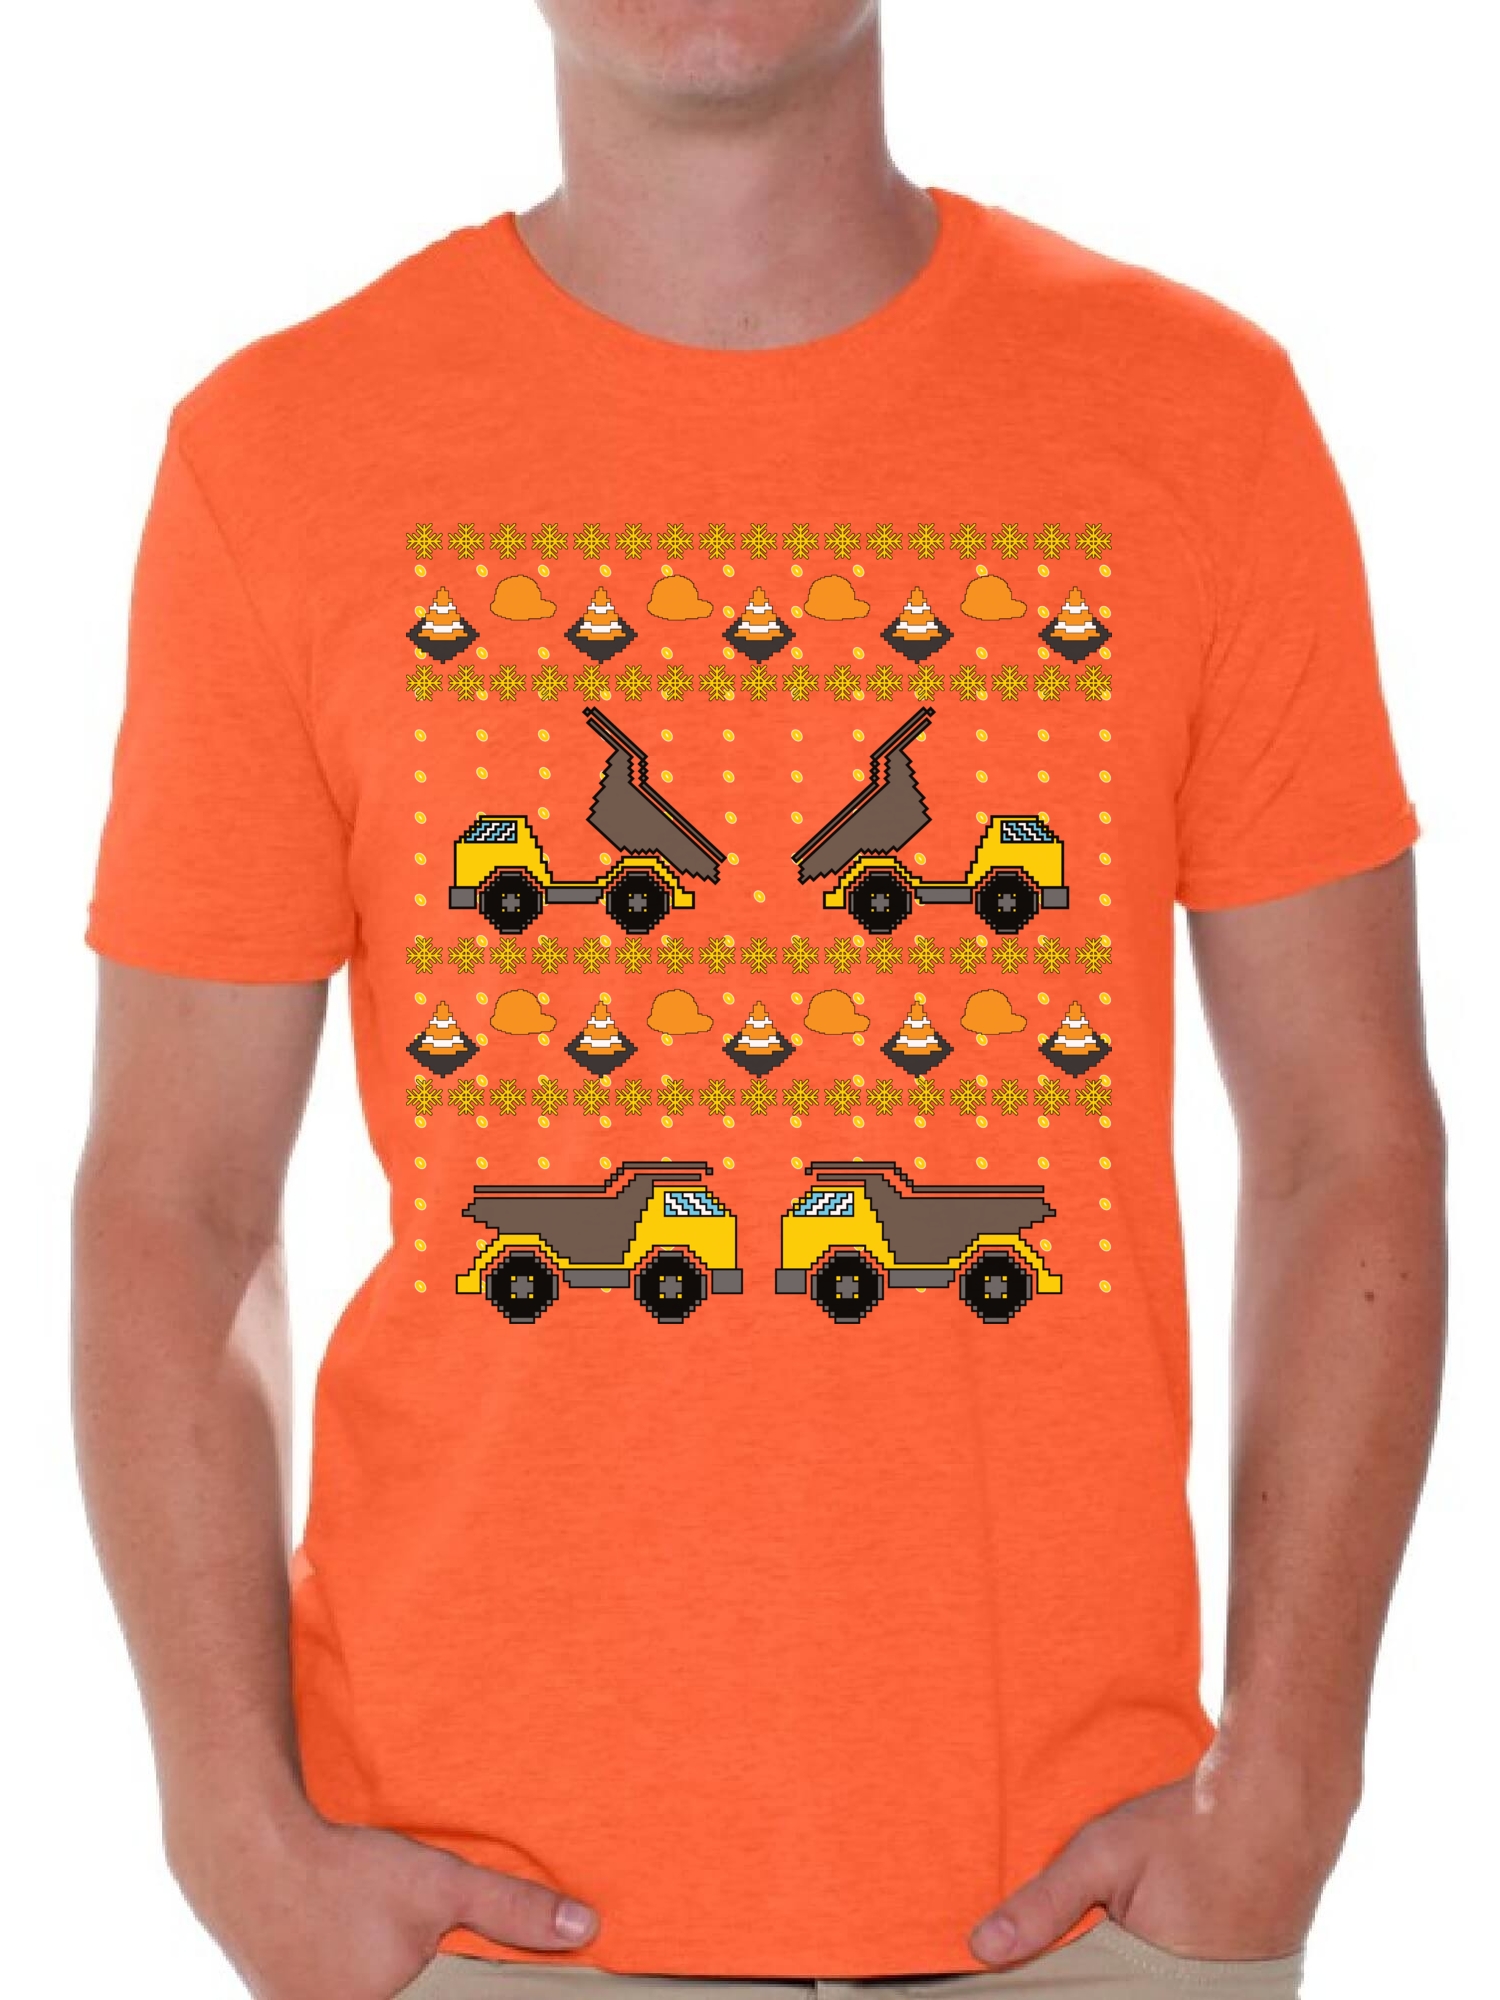 Awkward Styles Christmas Construction Truck Tshirt for Men Toy Truck Christmas Shirt Funny Xmas Tshirts for Men Xmas Truck Ugly Christmas T Shirt Christmas Gifts for Truck Fans Truck Accessories - image 1 of 4